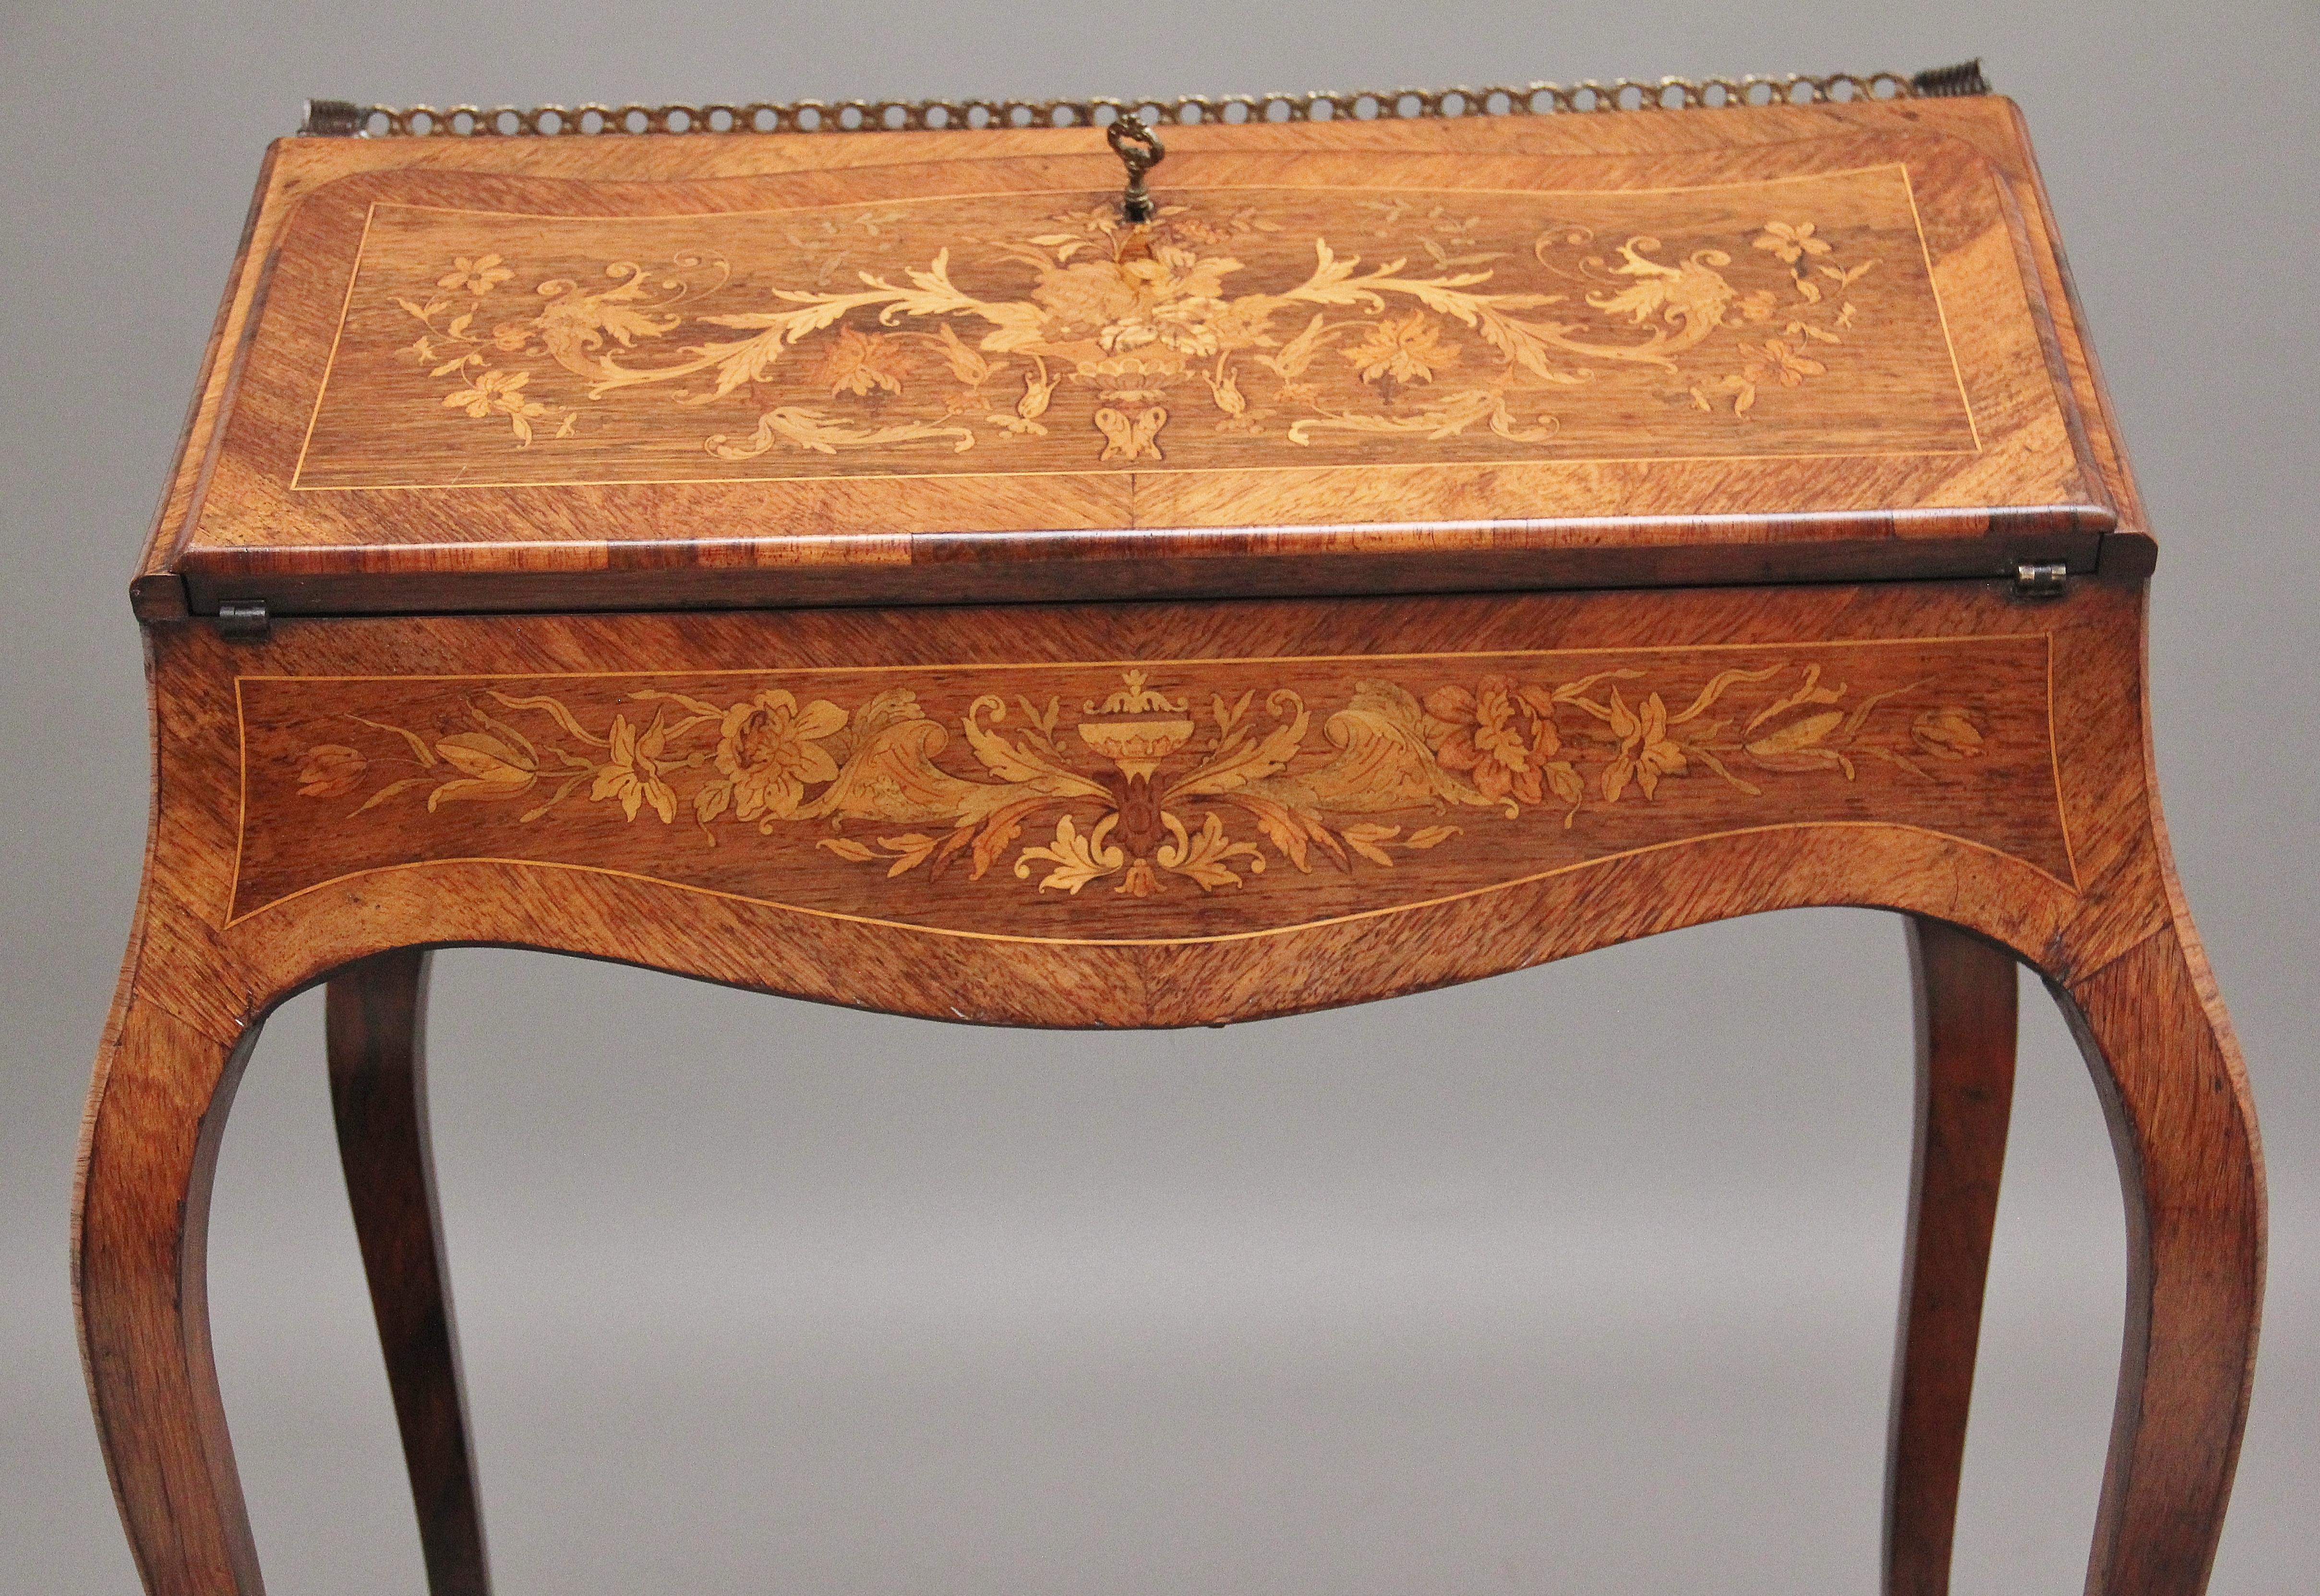 Superb Quality Freestanding 19th Century Kingwood and Marquetry Inlaid Bureau For Sale 9